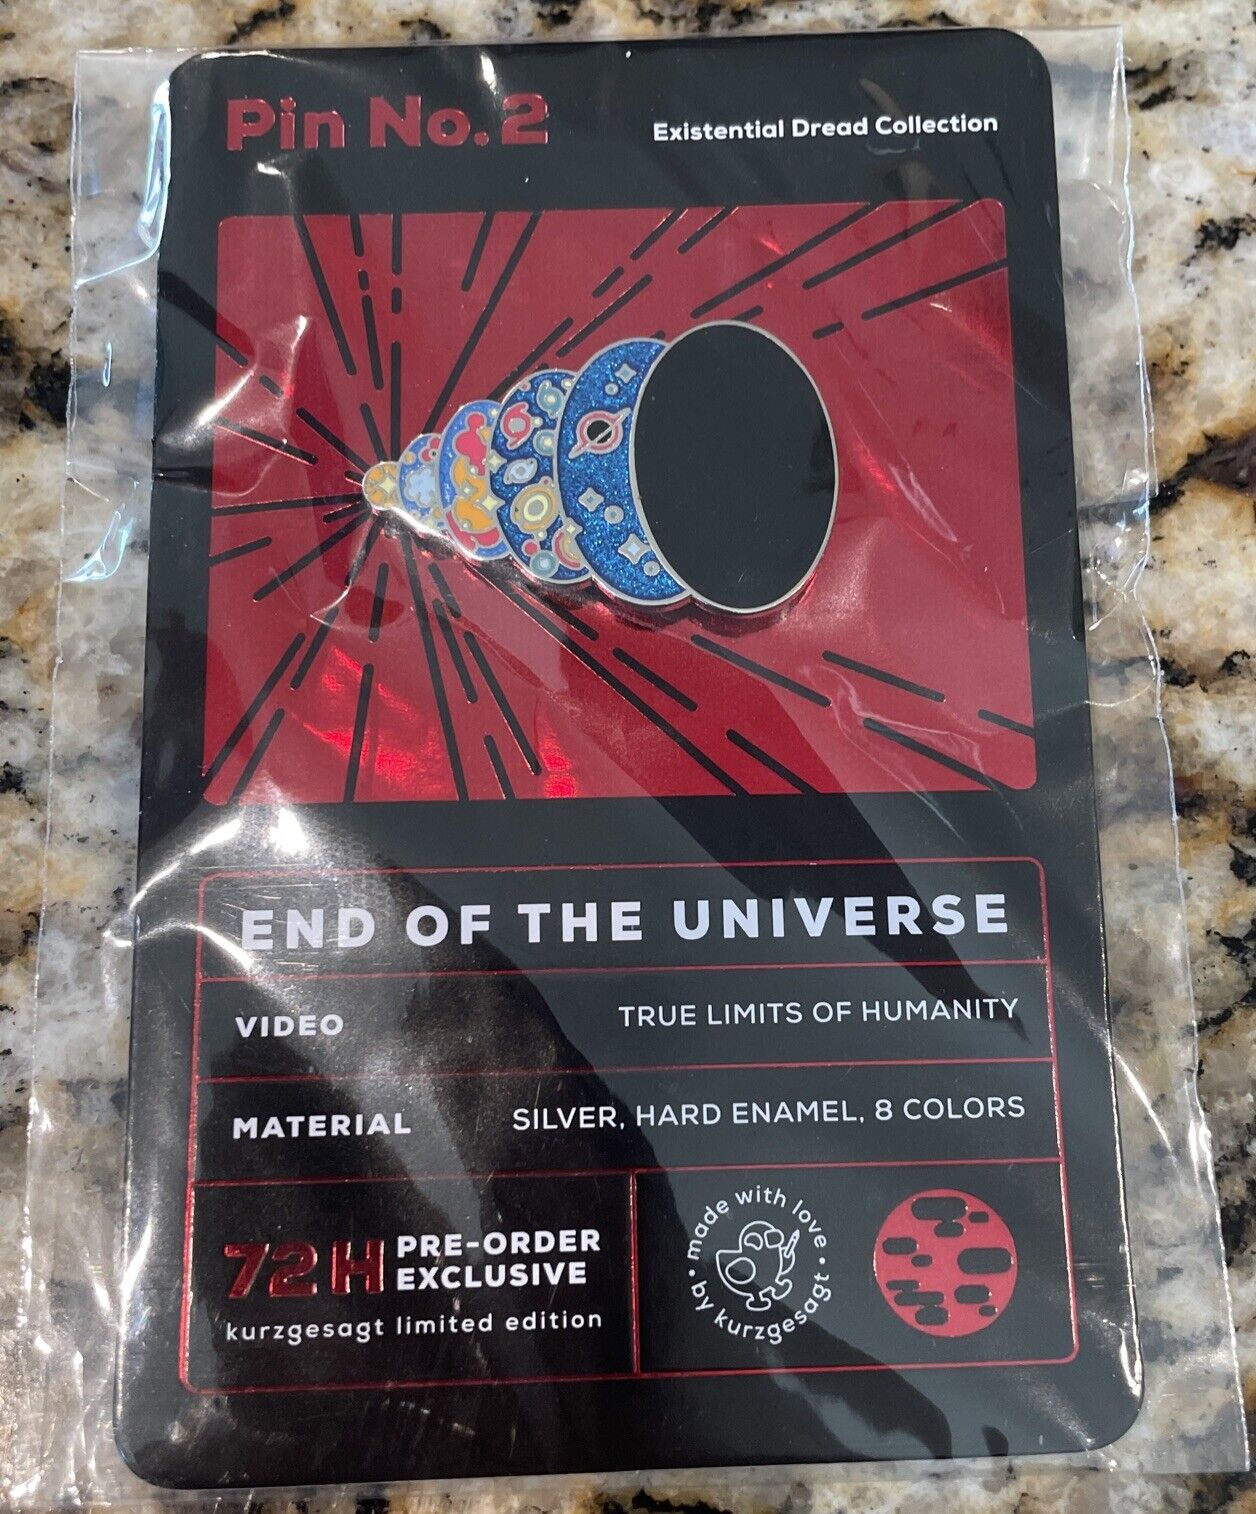 Kurzgesagt - End of the Universe Pin Limited Edition Existential Dread Pin No. 2